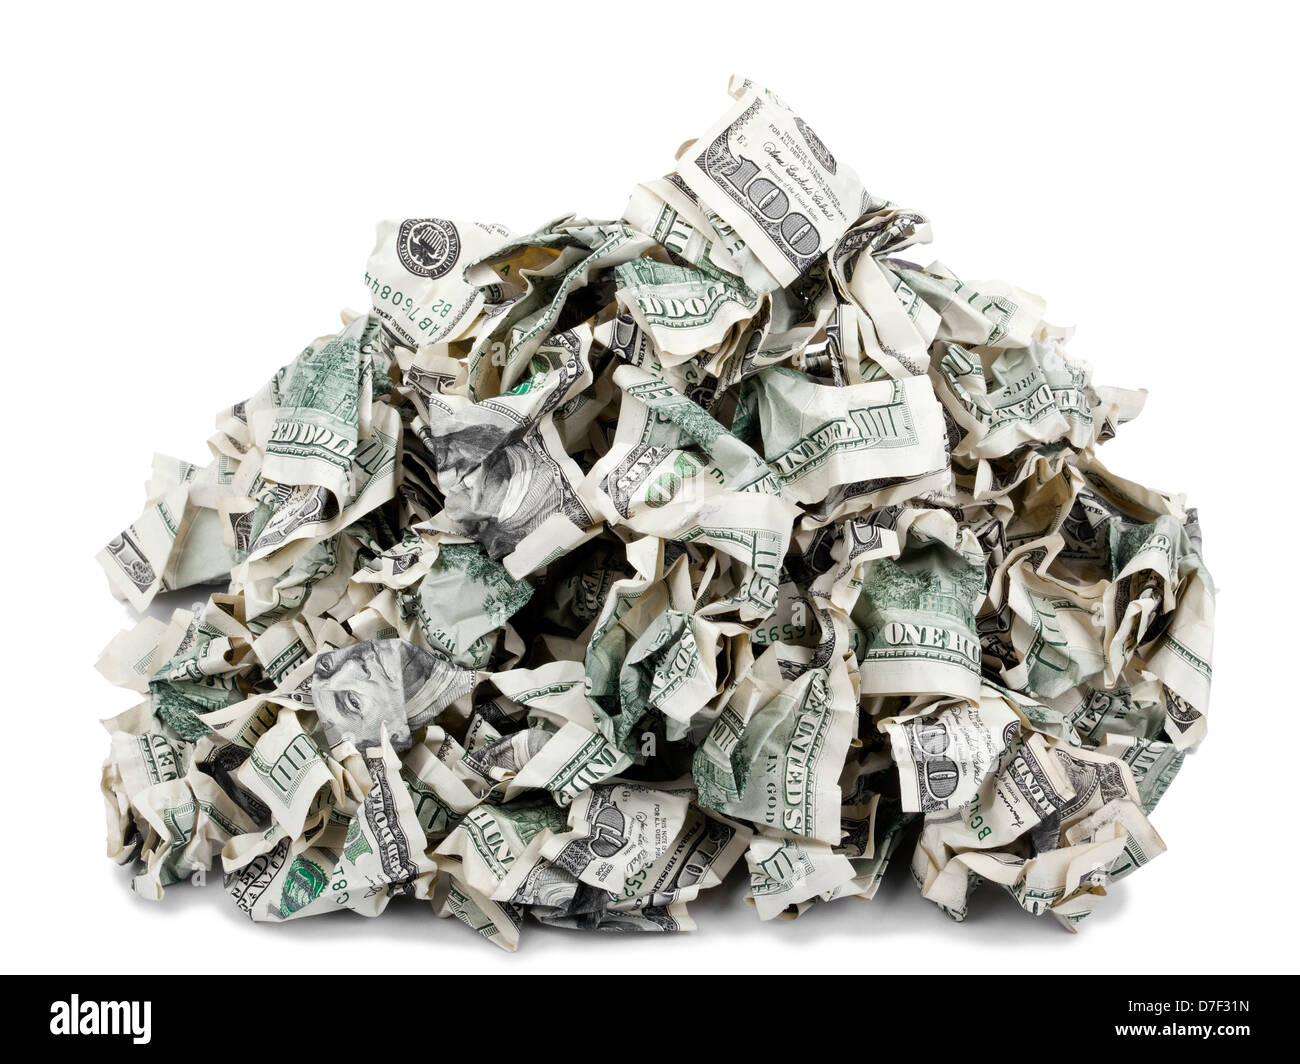 A pile of crimped 100 US$ money notes on top of each other, isolated on white background. Stock Photo